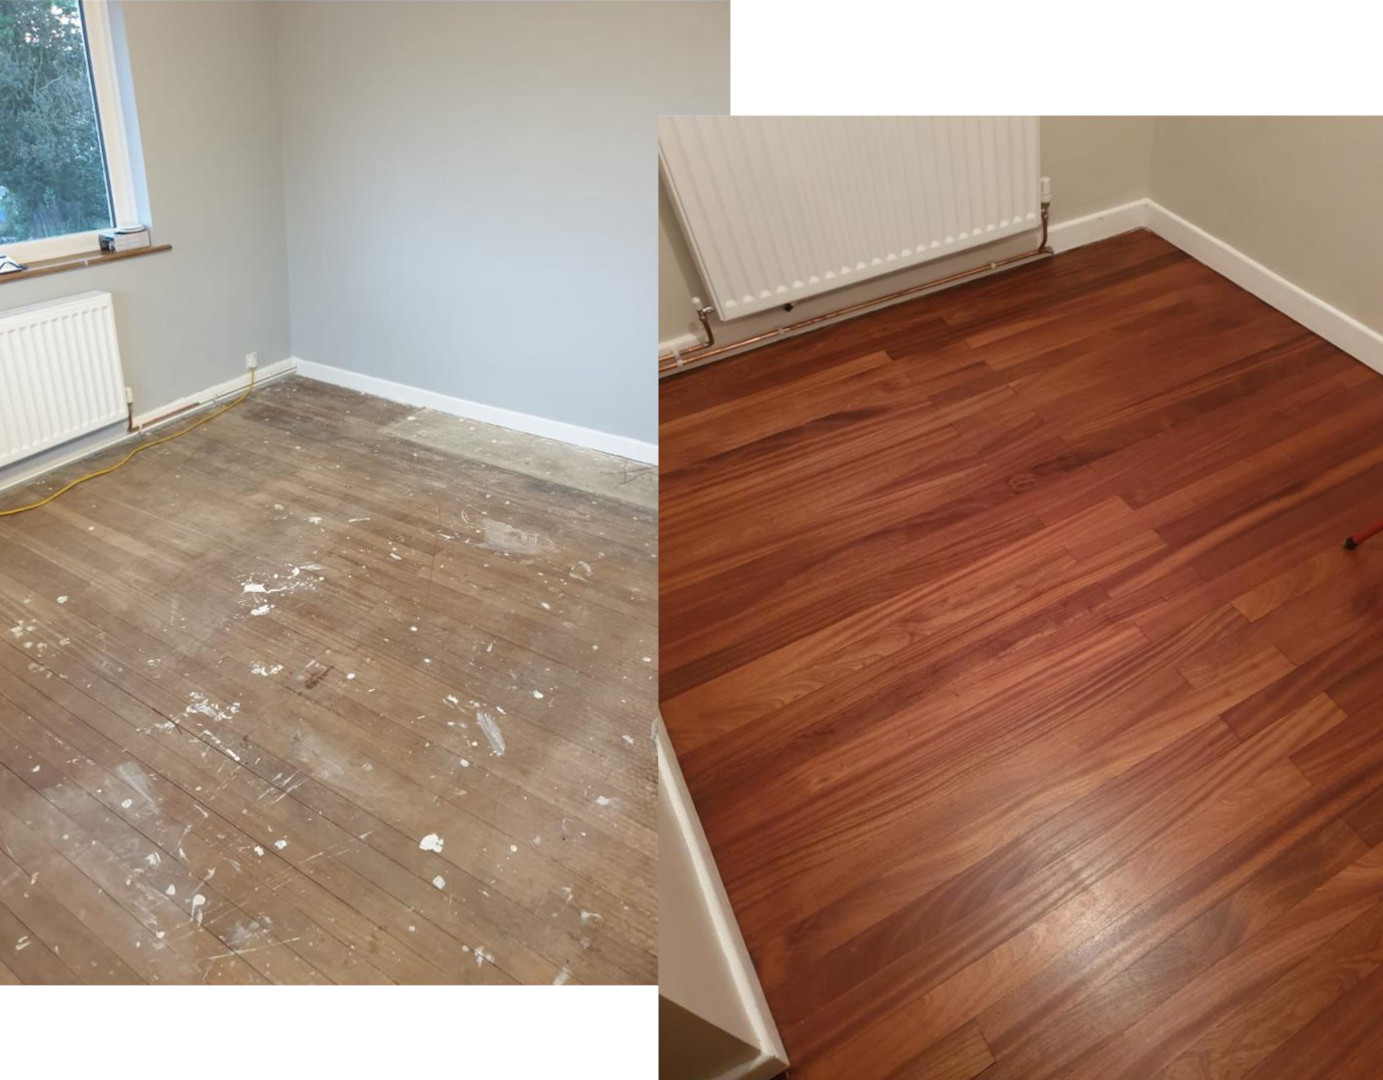 Floor sanding and restoration Cardiff Florek Renovation before and after renovated floor